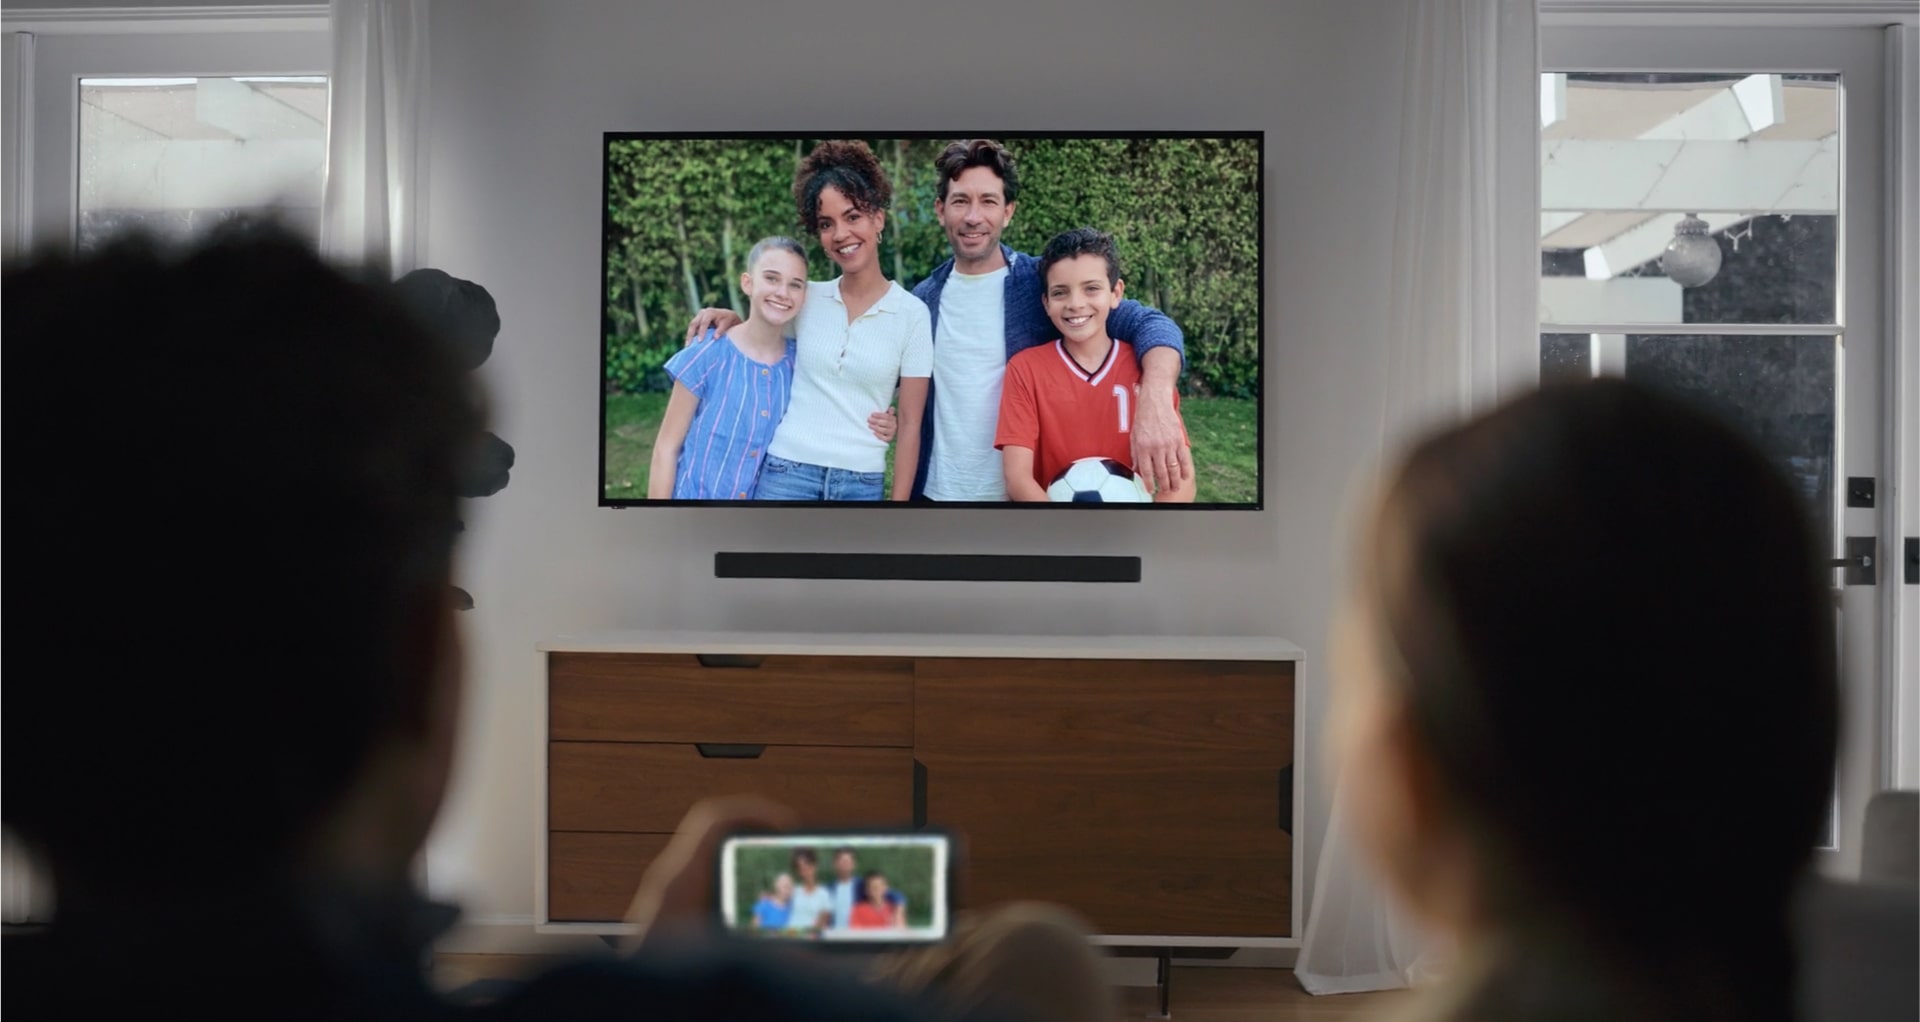 Showcase your favorite family moments, videos, and photo albums on your VIZIO Smart TV.